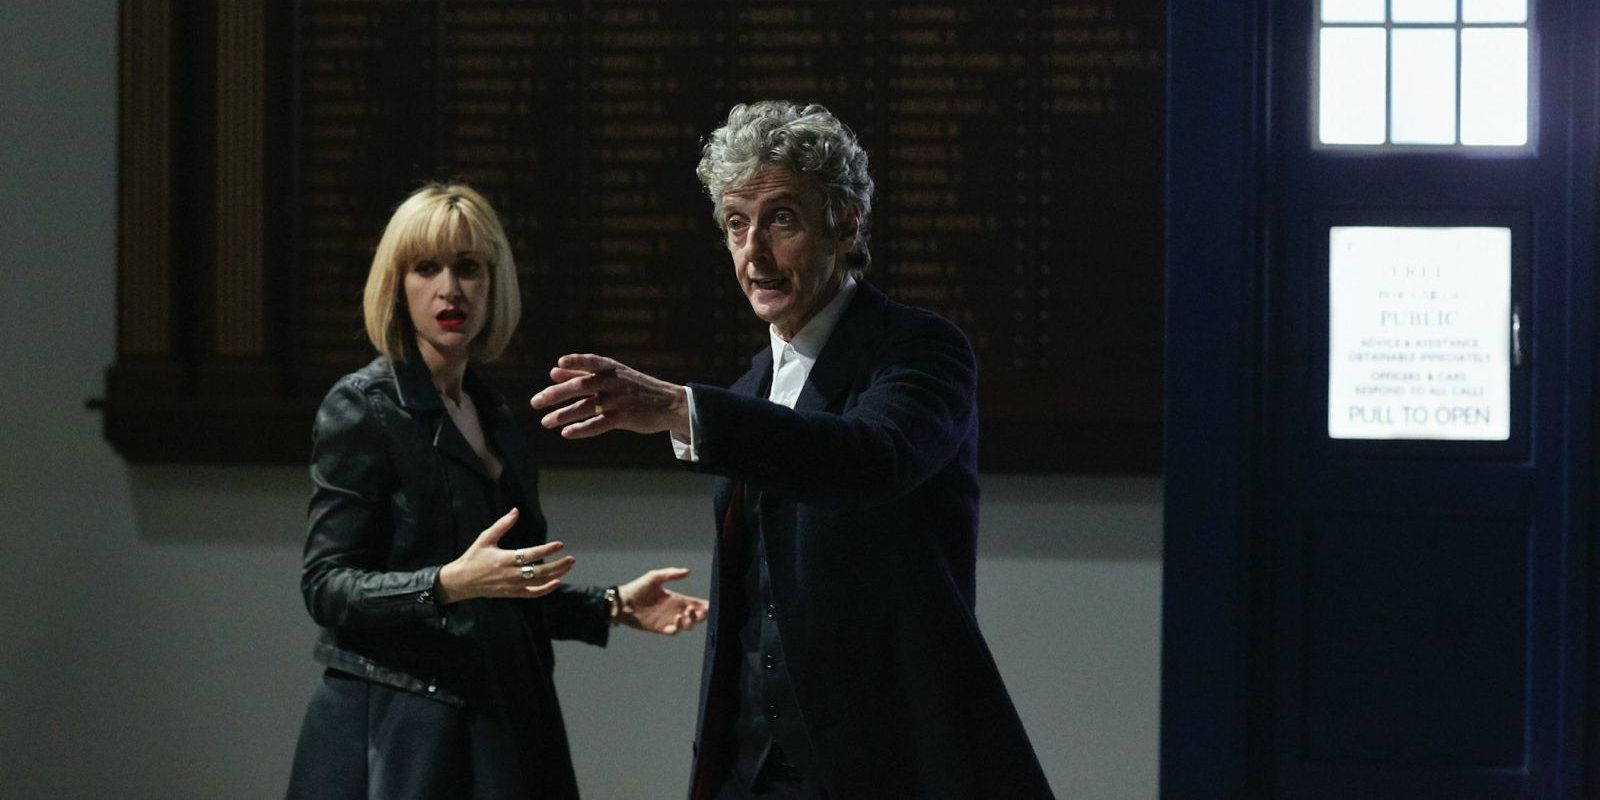 Class premiere - Katherine Kelly and Peter Capaldi as The Doctor